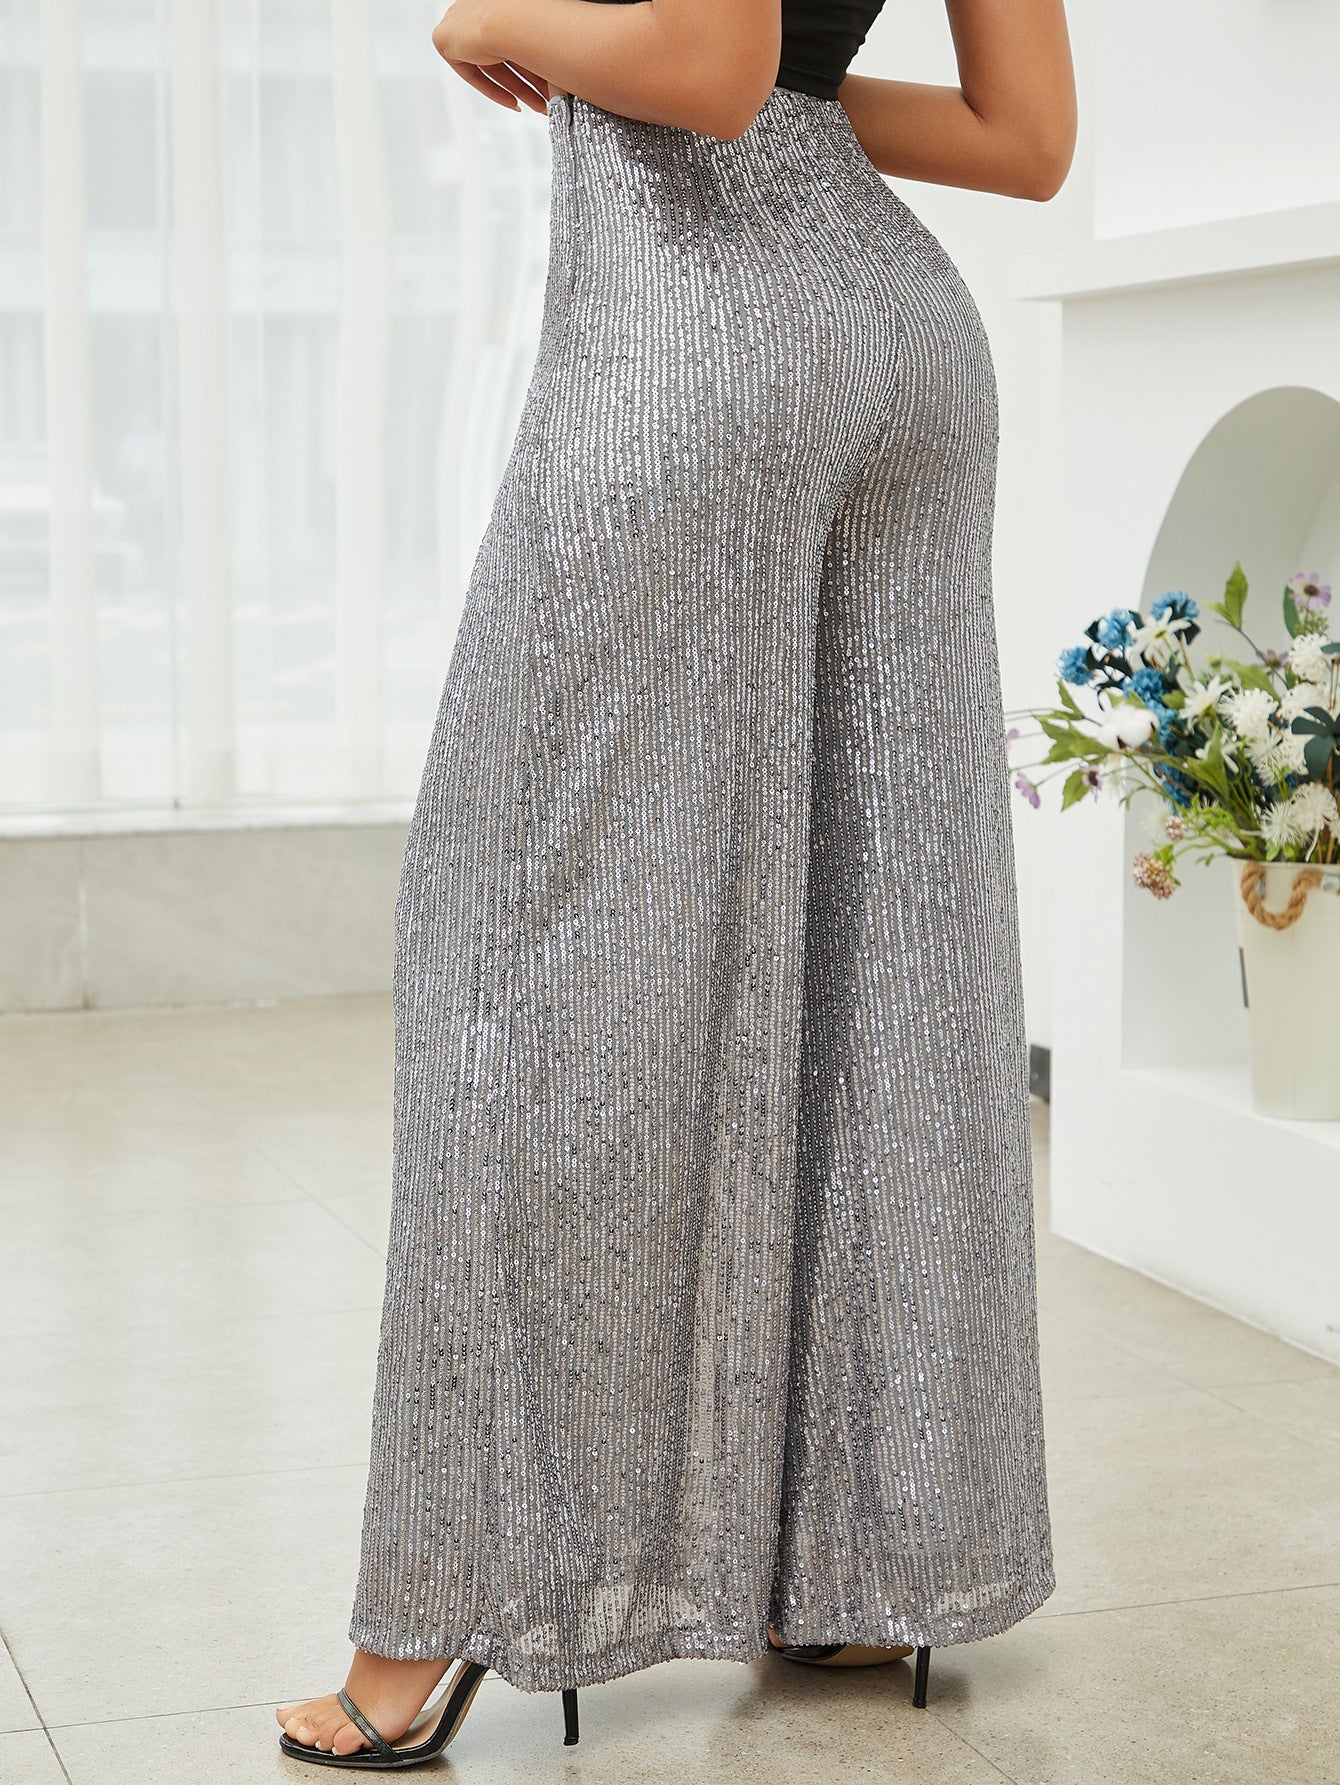 2023 Fashion Trends | Silver Aesthetic Sequined Wide Leg Pants